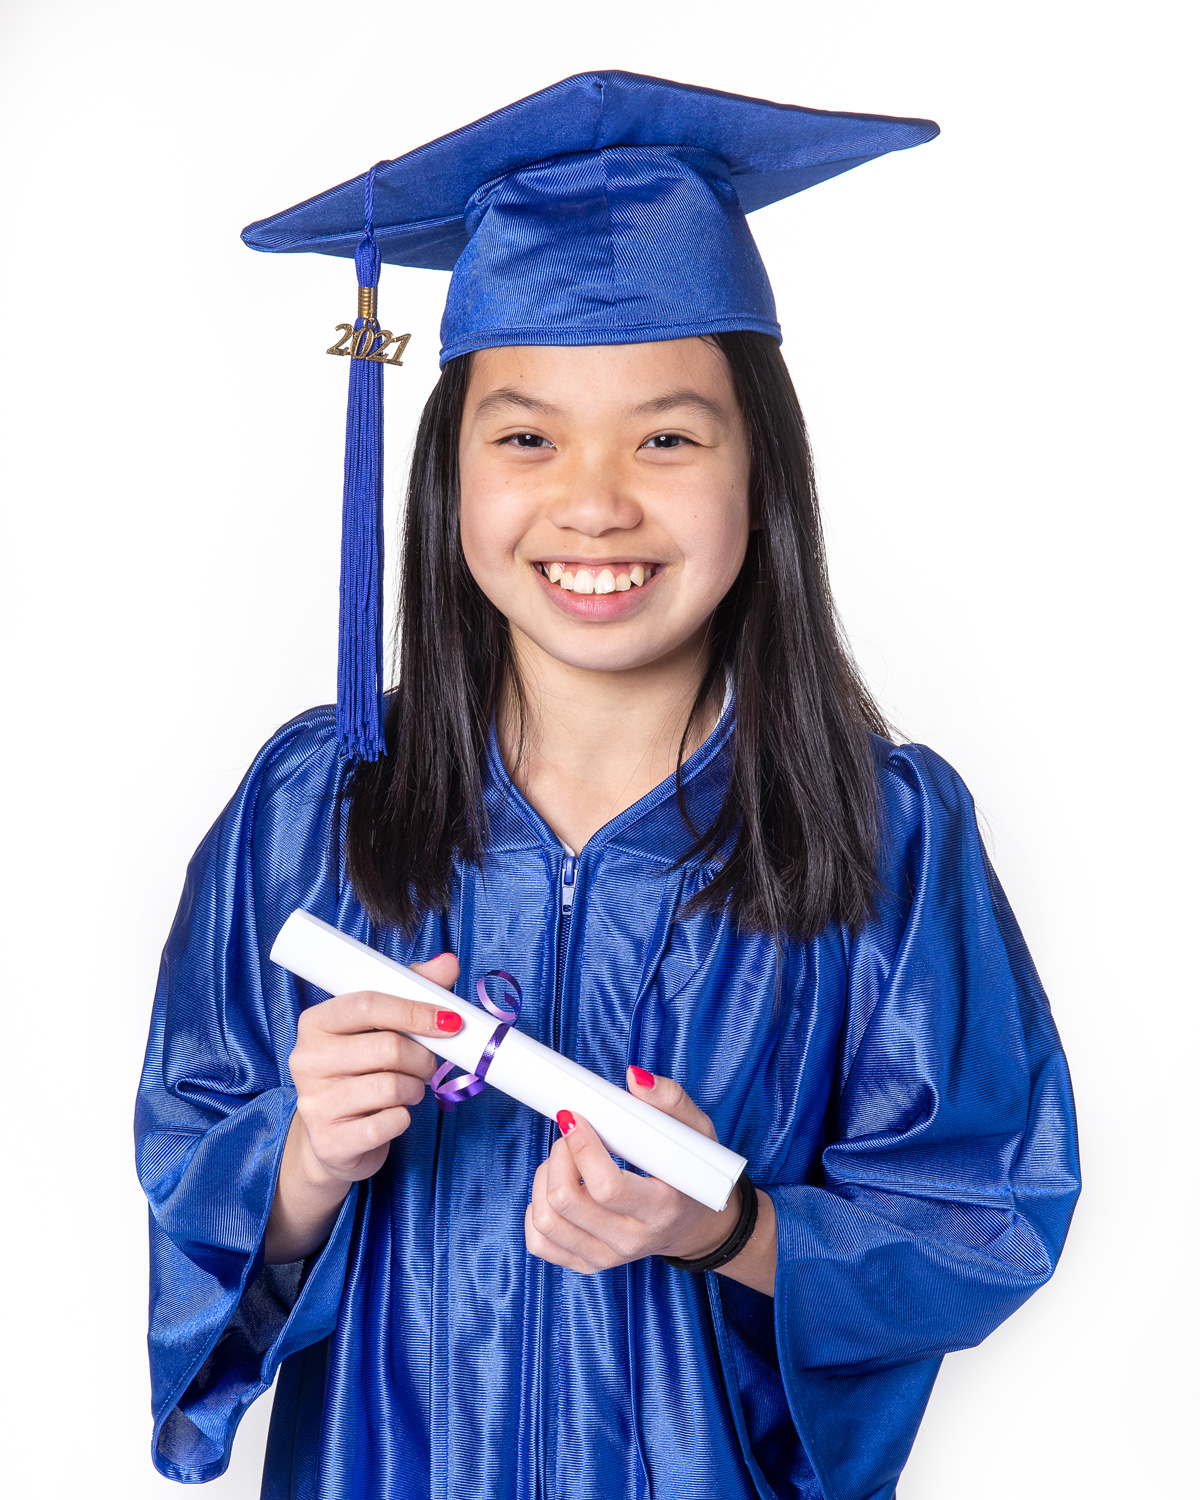 Grade 6 girl in cap and gown